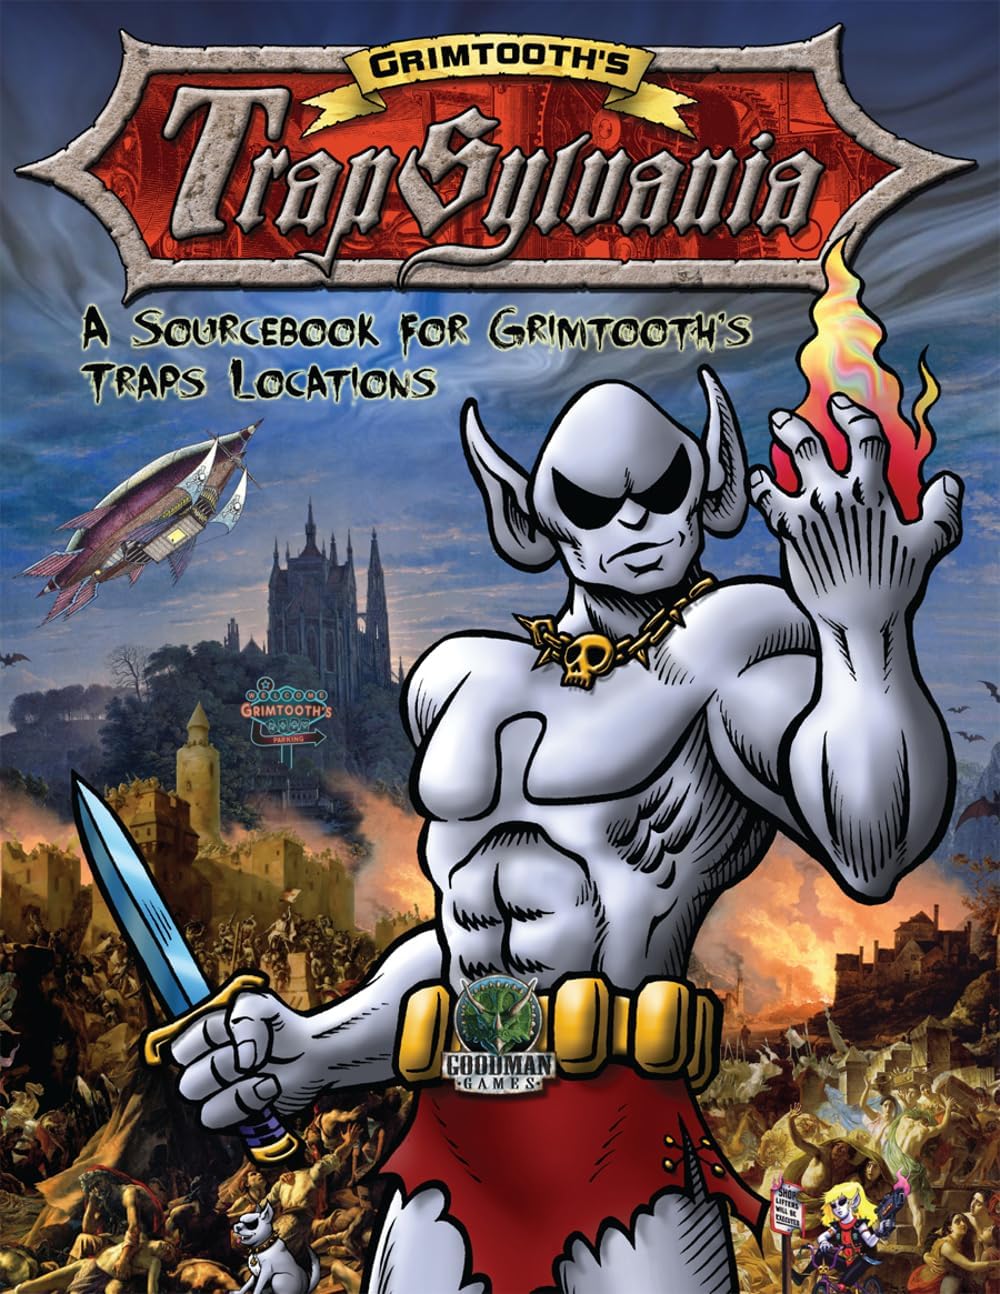 Grimtooth's Trapsylvania - A Sourcebook for Grimtooth's Traps Locations (hardcover)